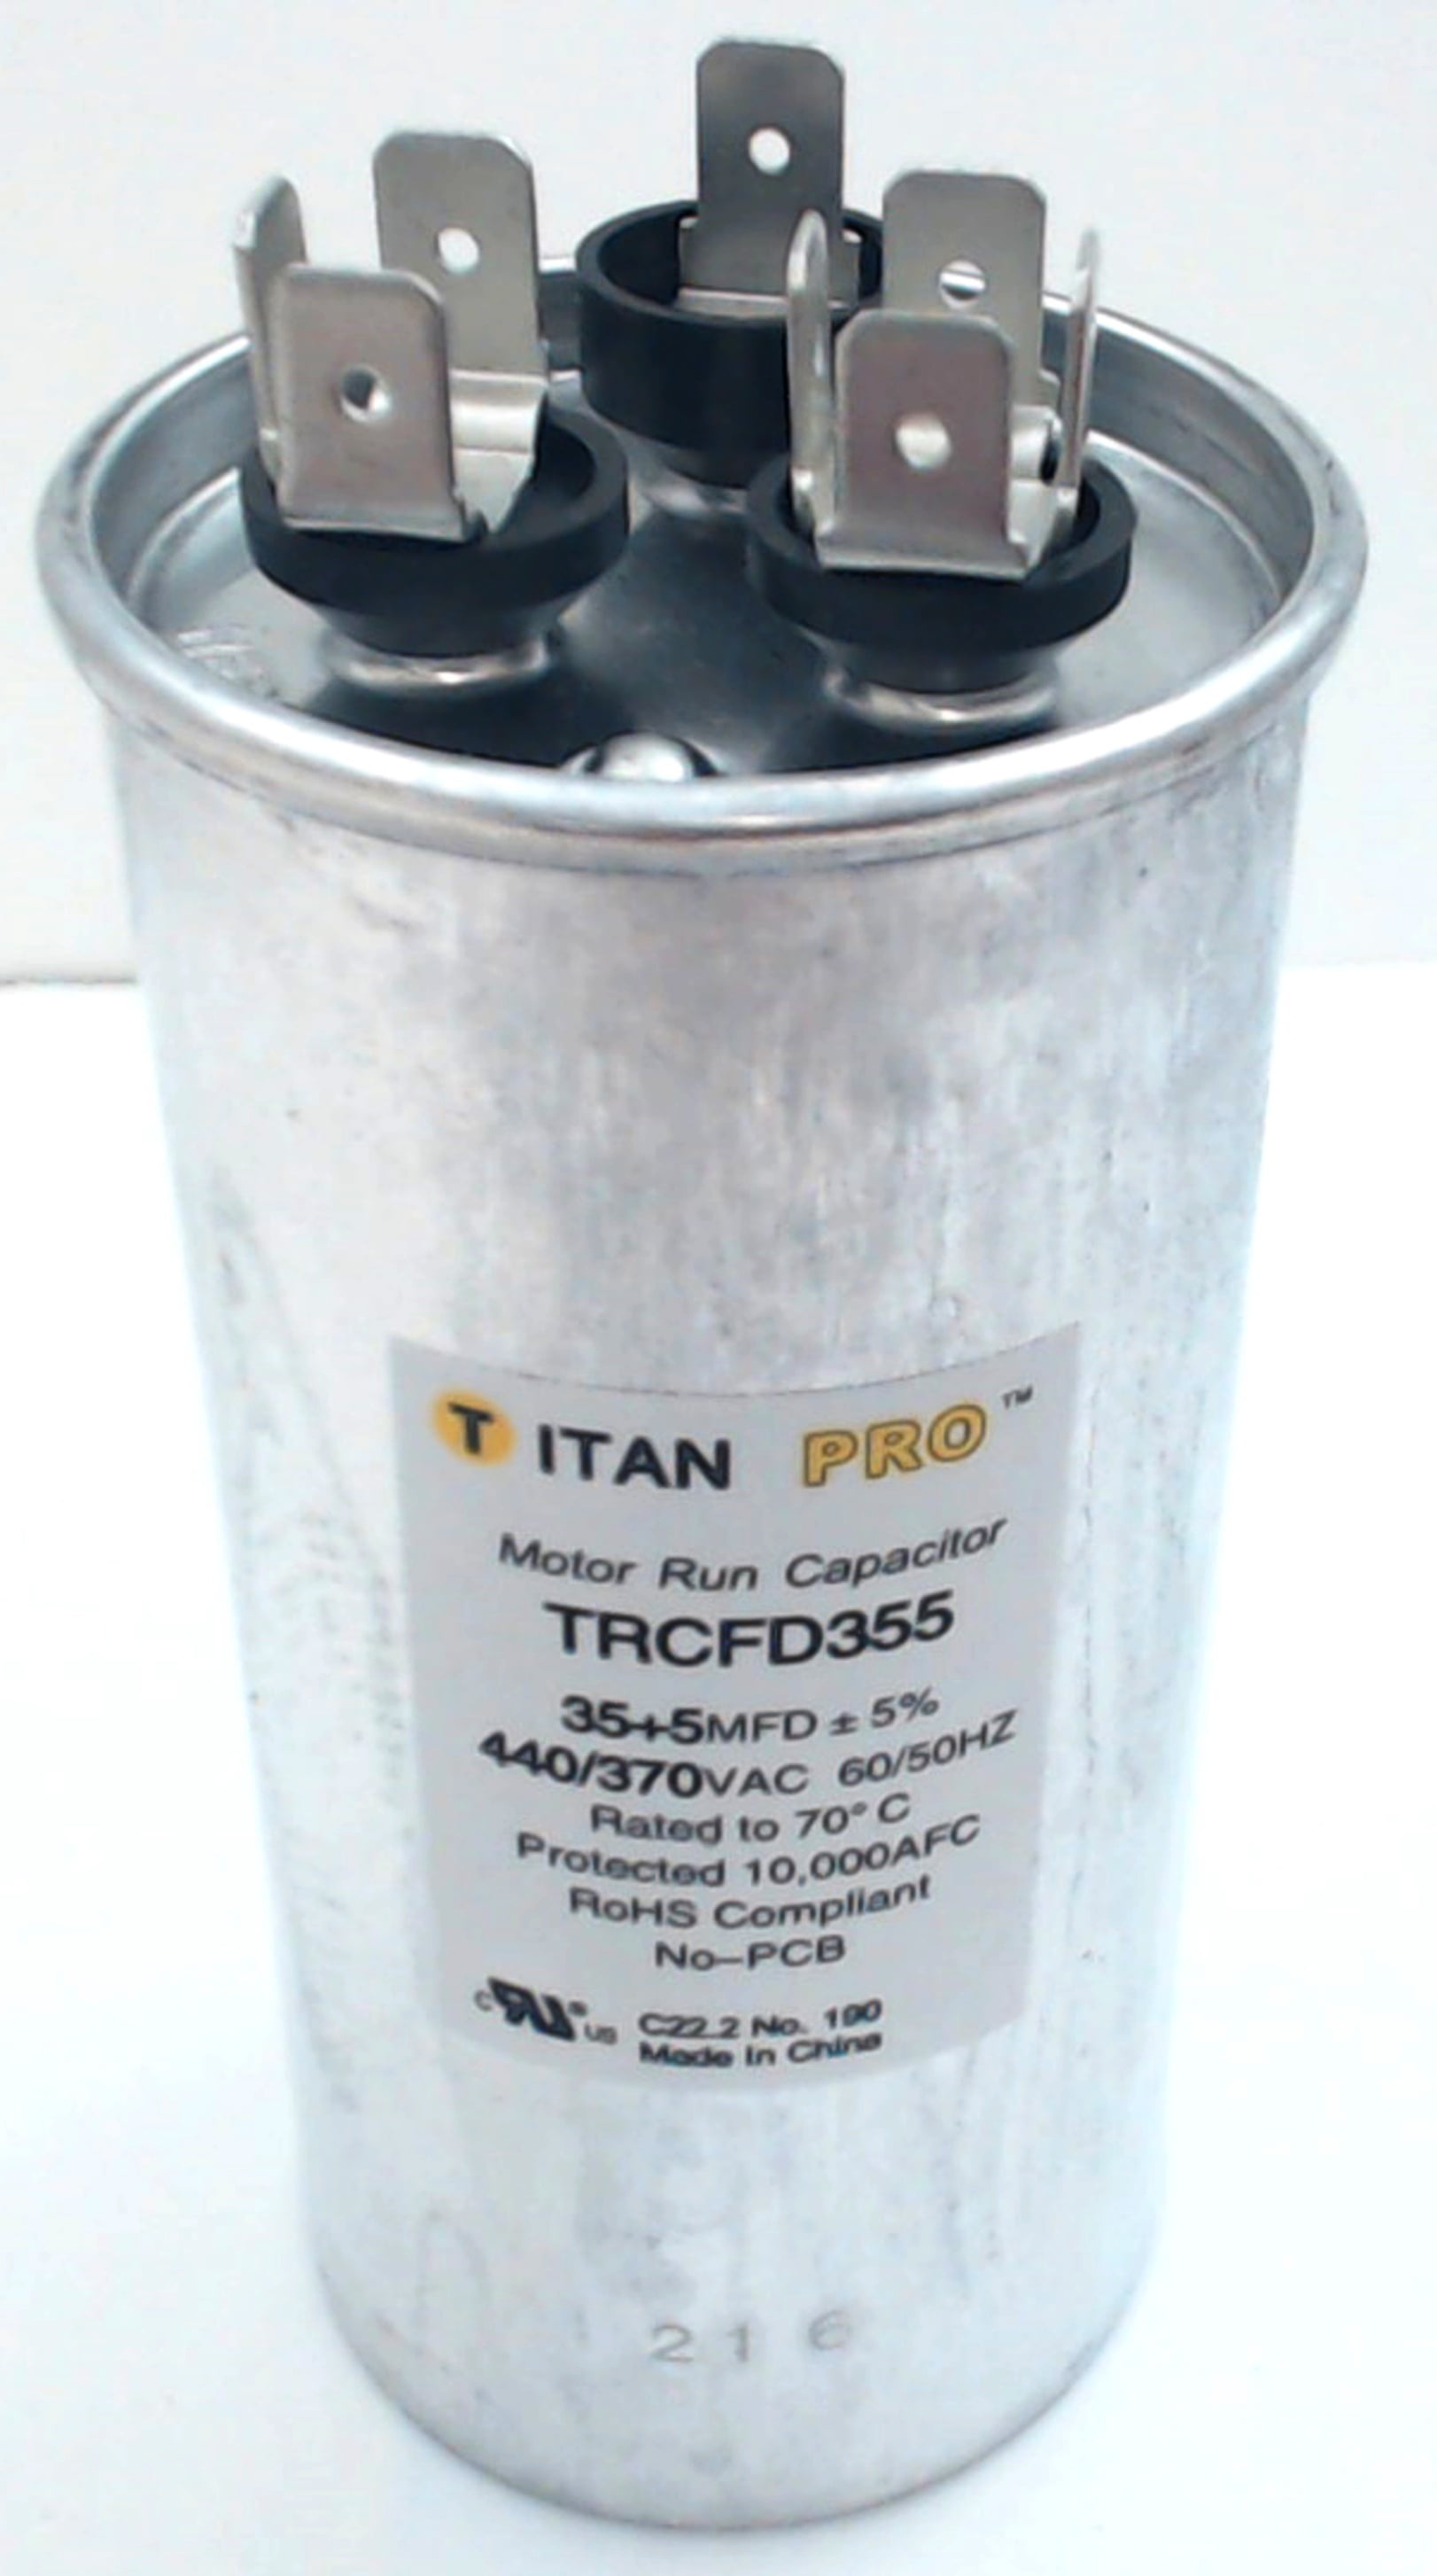 Mars Replacement Run Capacitor 40+5 Mfd 370V Round 12878 By Titan 